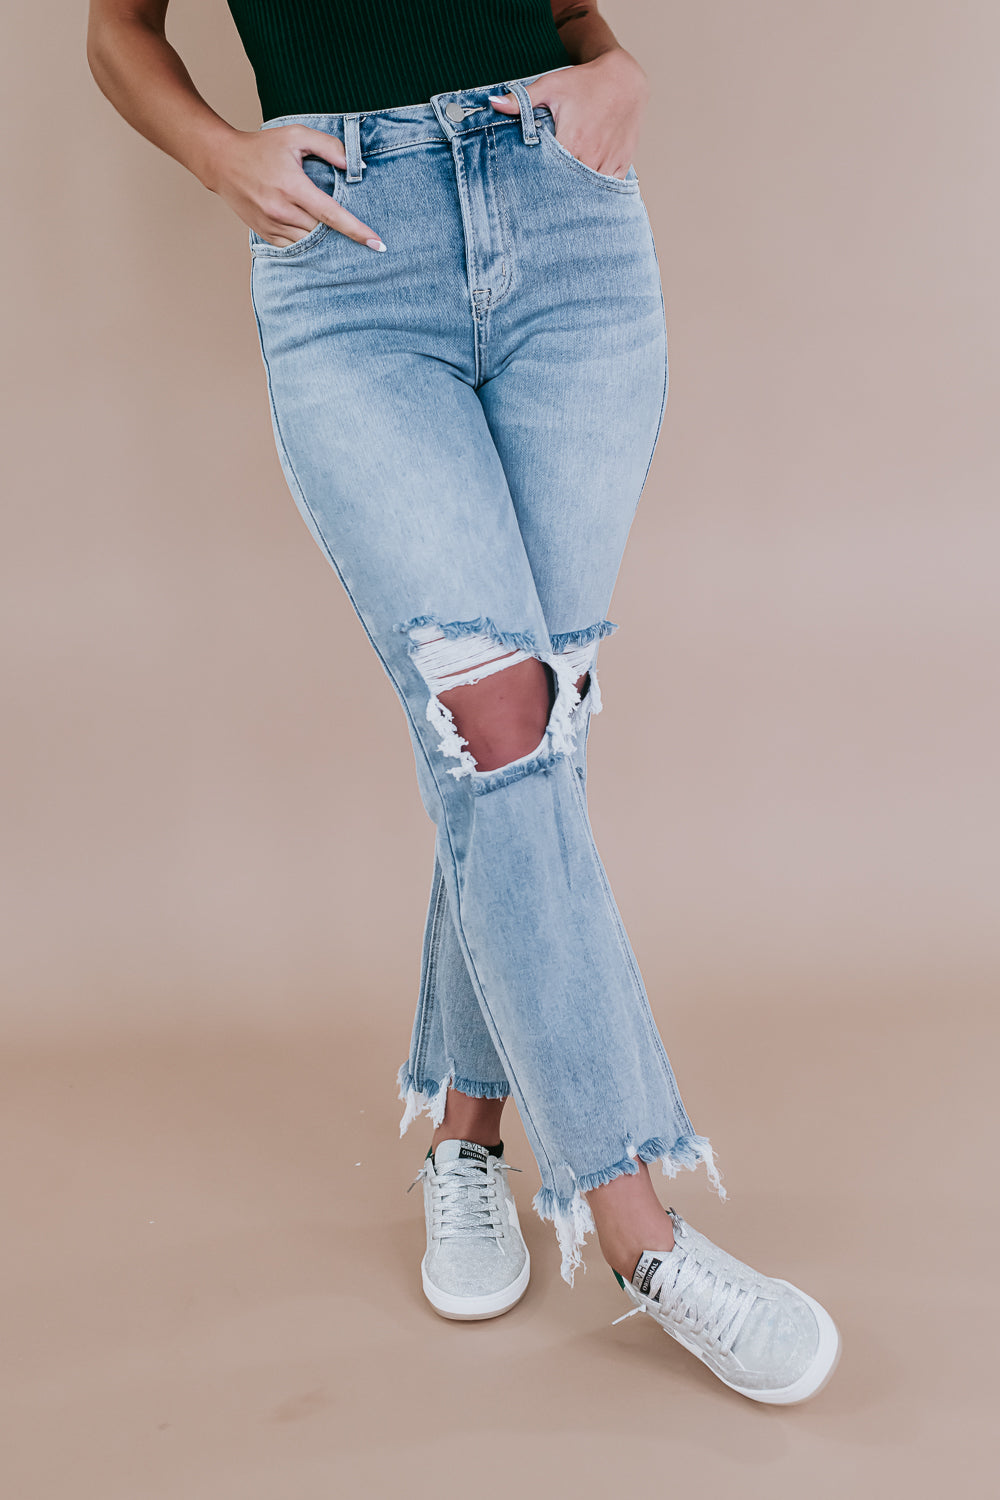 Mom jeans are the most comfortable pants you could have in your wardrobe😍